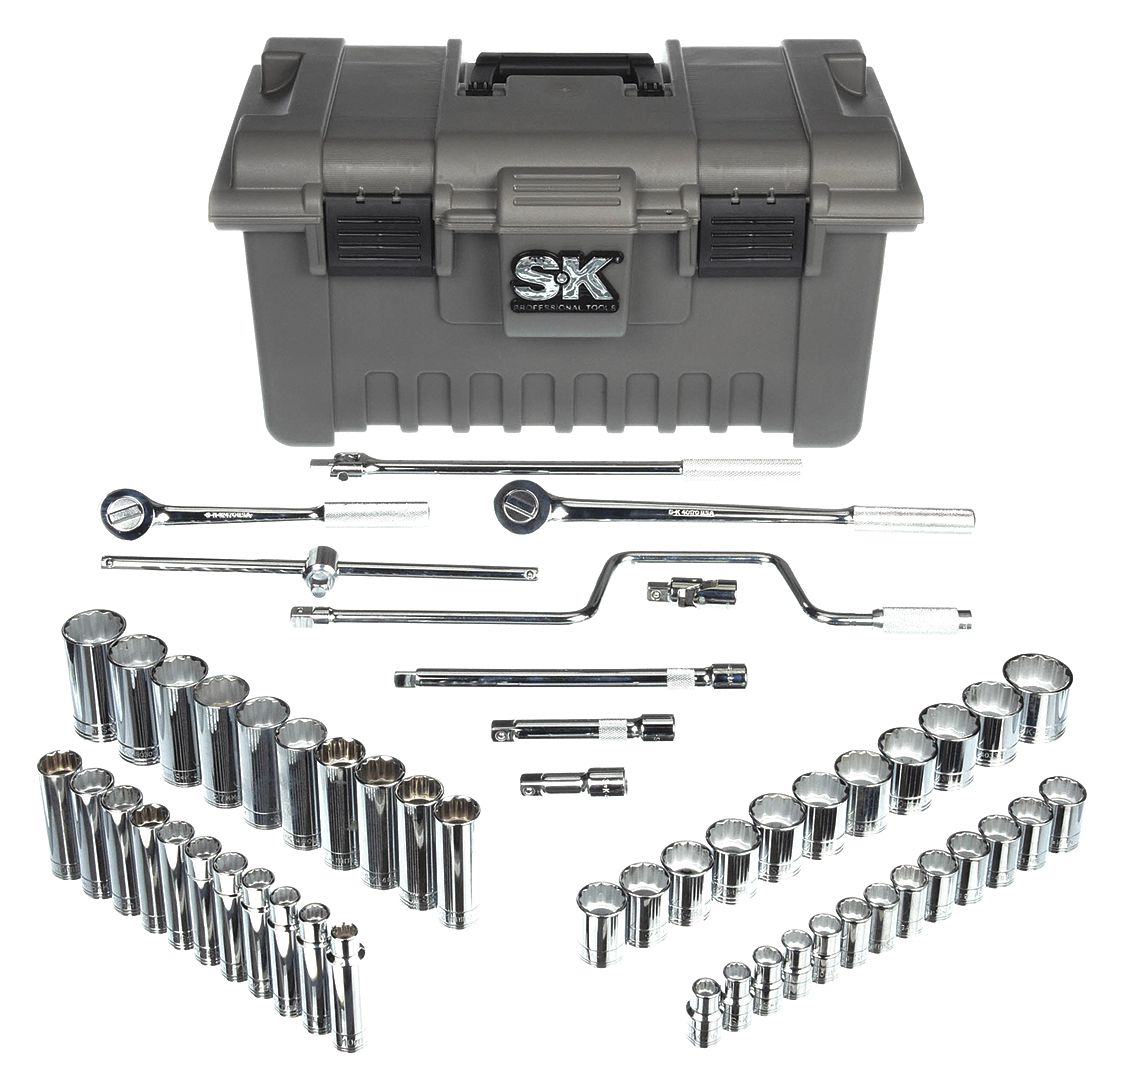 SOCKET WRENCH SET,METRIC,1/2IN DR,54 PC